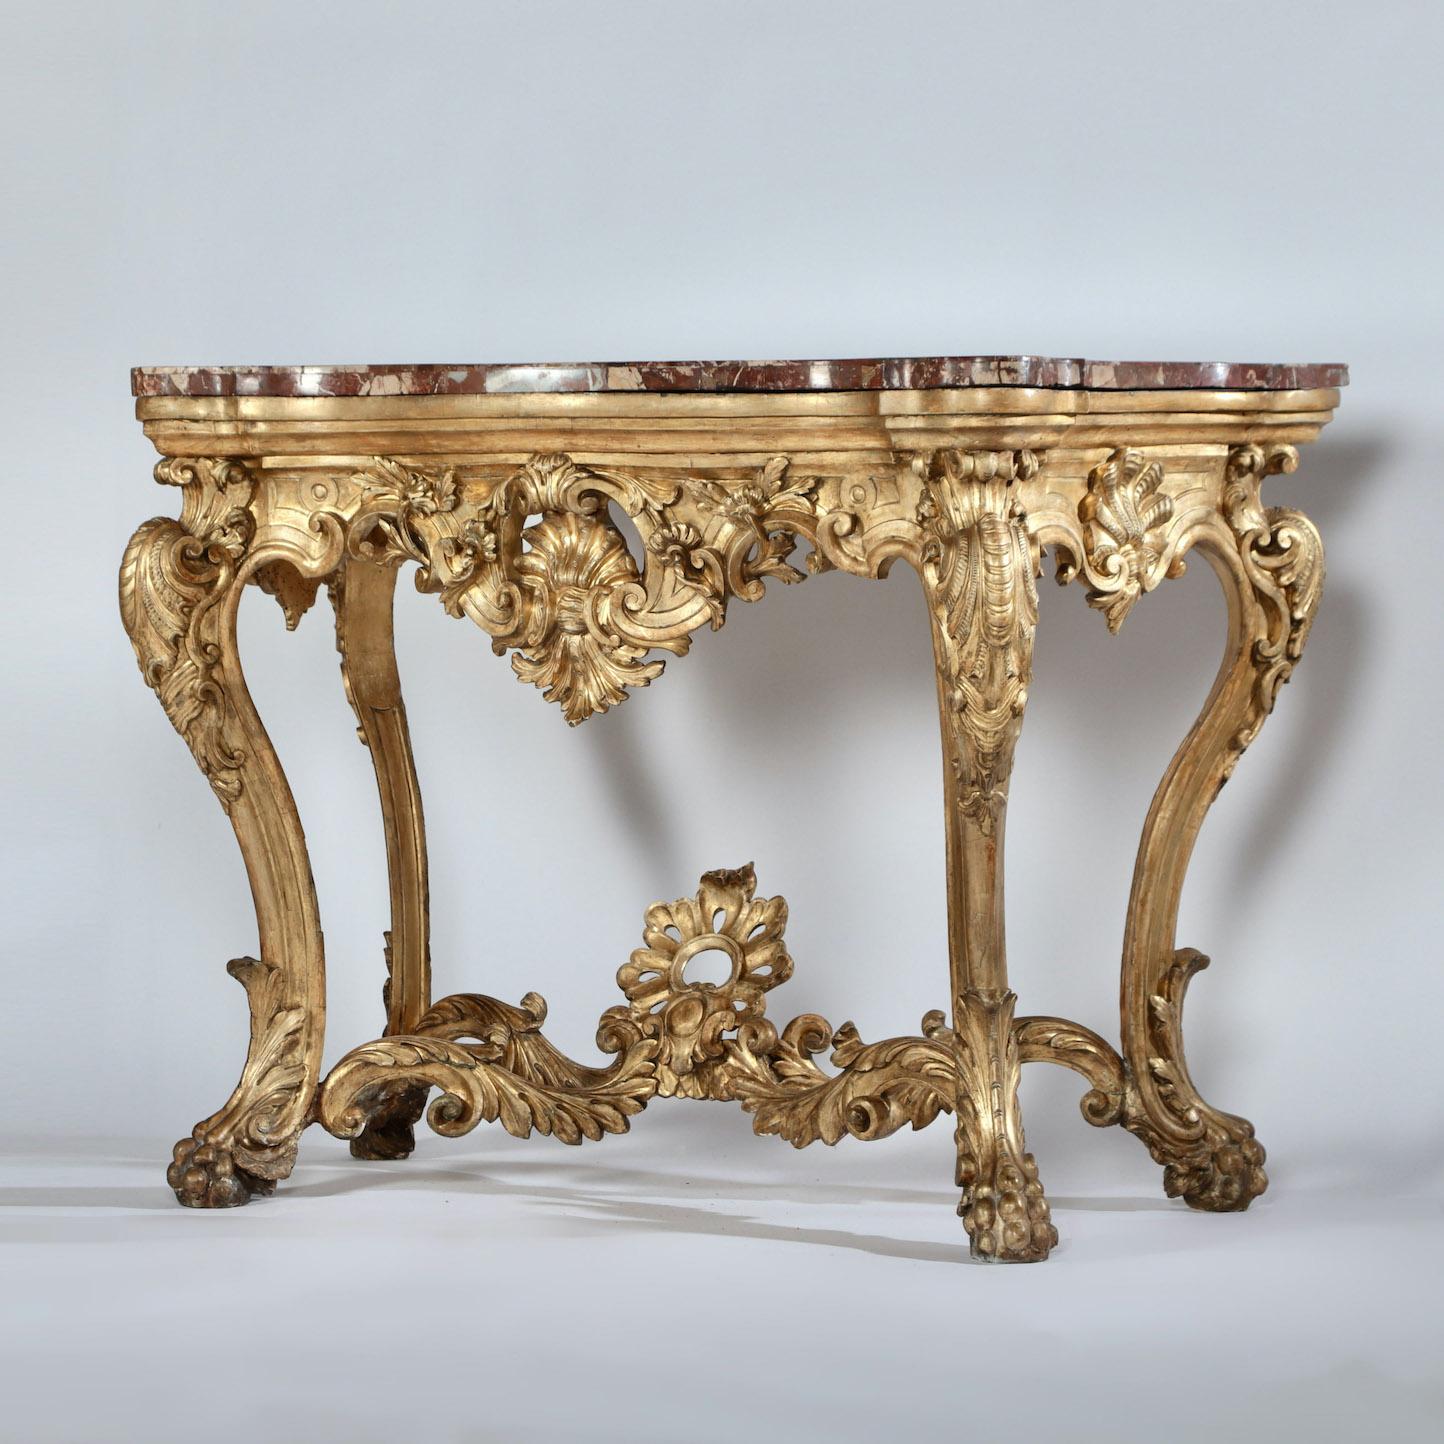 A beautiful 18th century Italian console table with a rich, red, veneered marble top

Italy, Circa 1770

